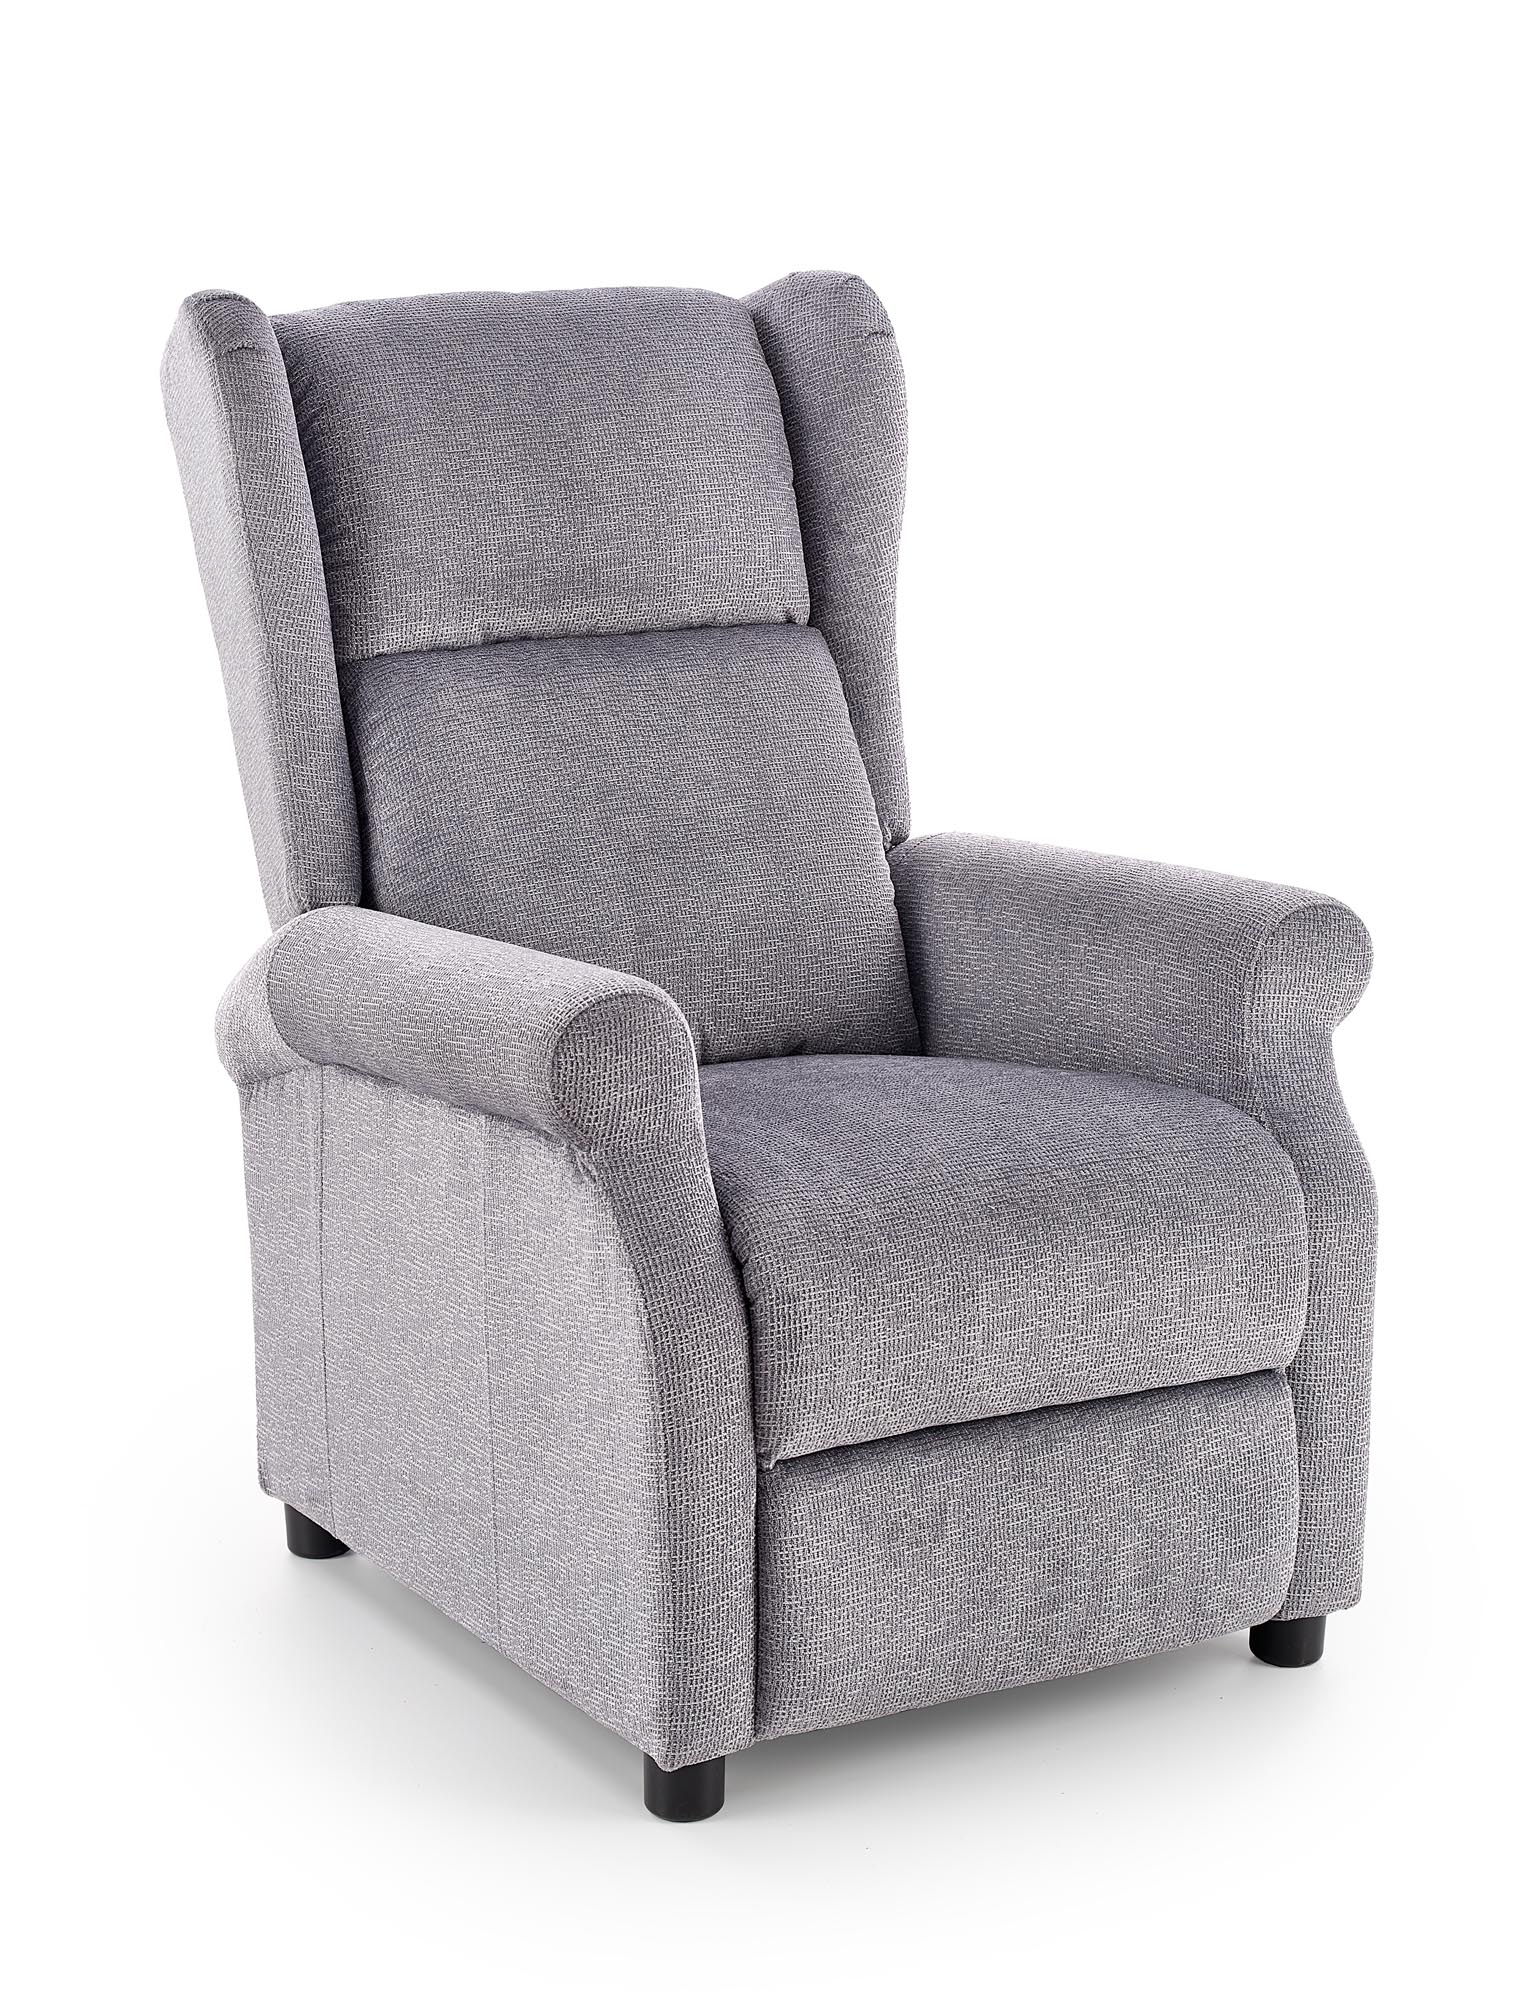 AGUSTIN recliner with massage function